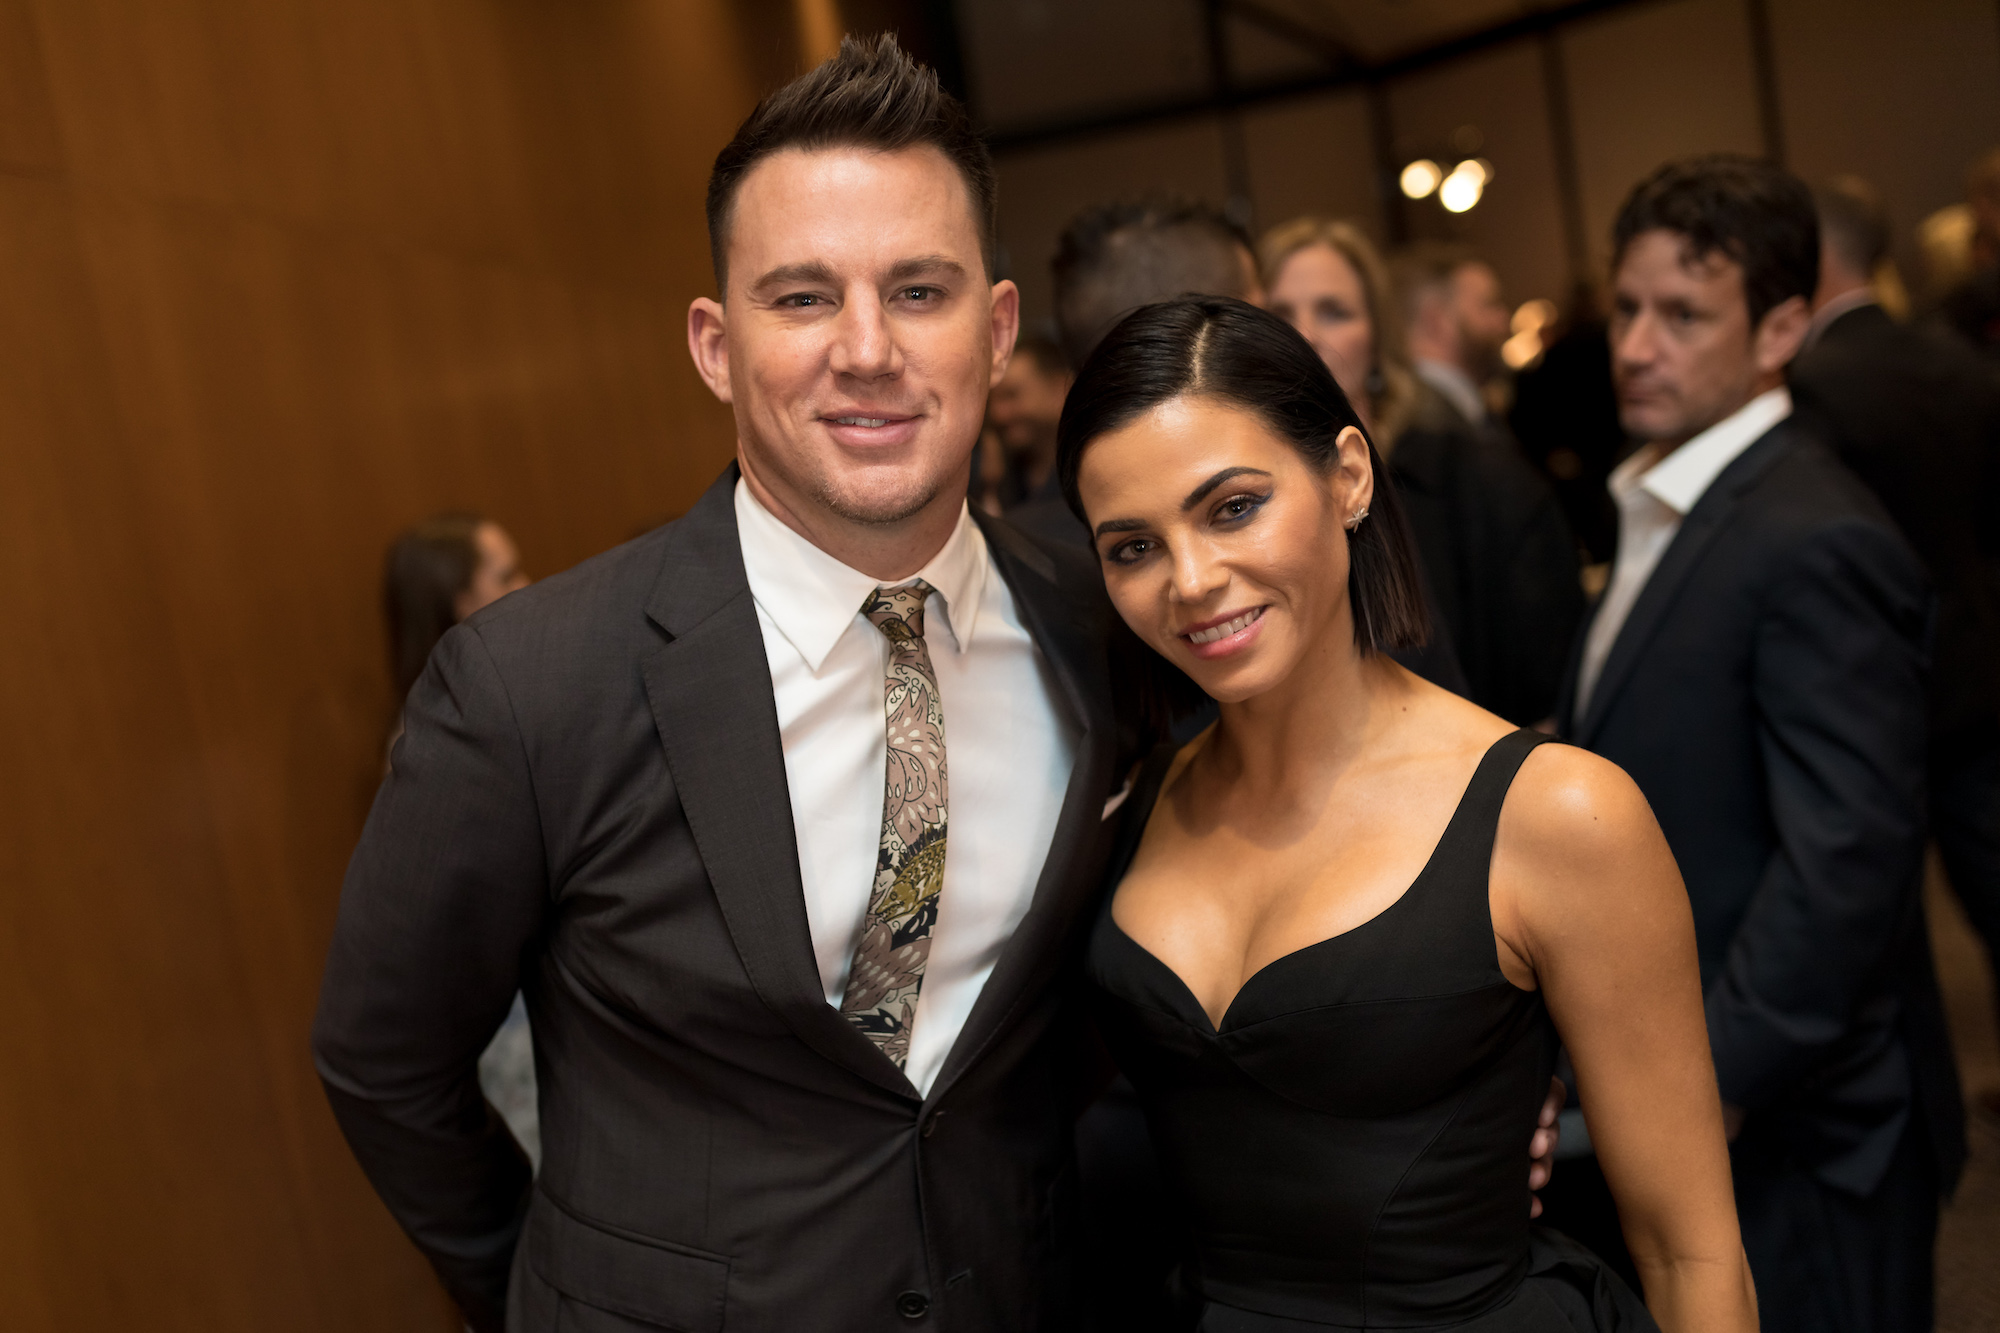 Channing Tatum and Jenna Dewan attending the premiere of War Dog: A Soldier's Best Friend" afterparty in 2017